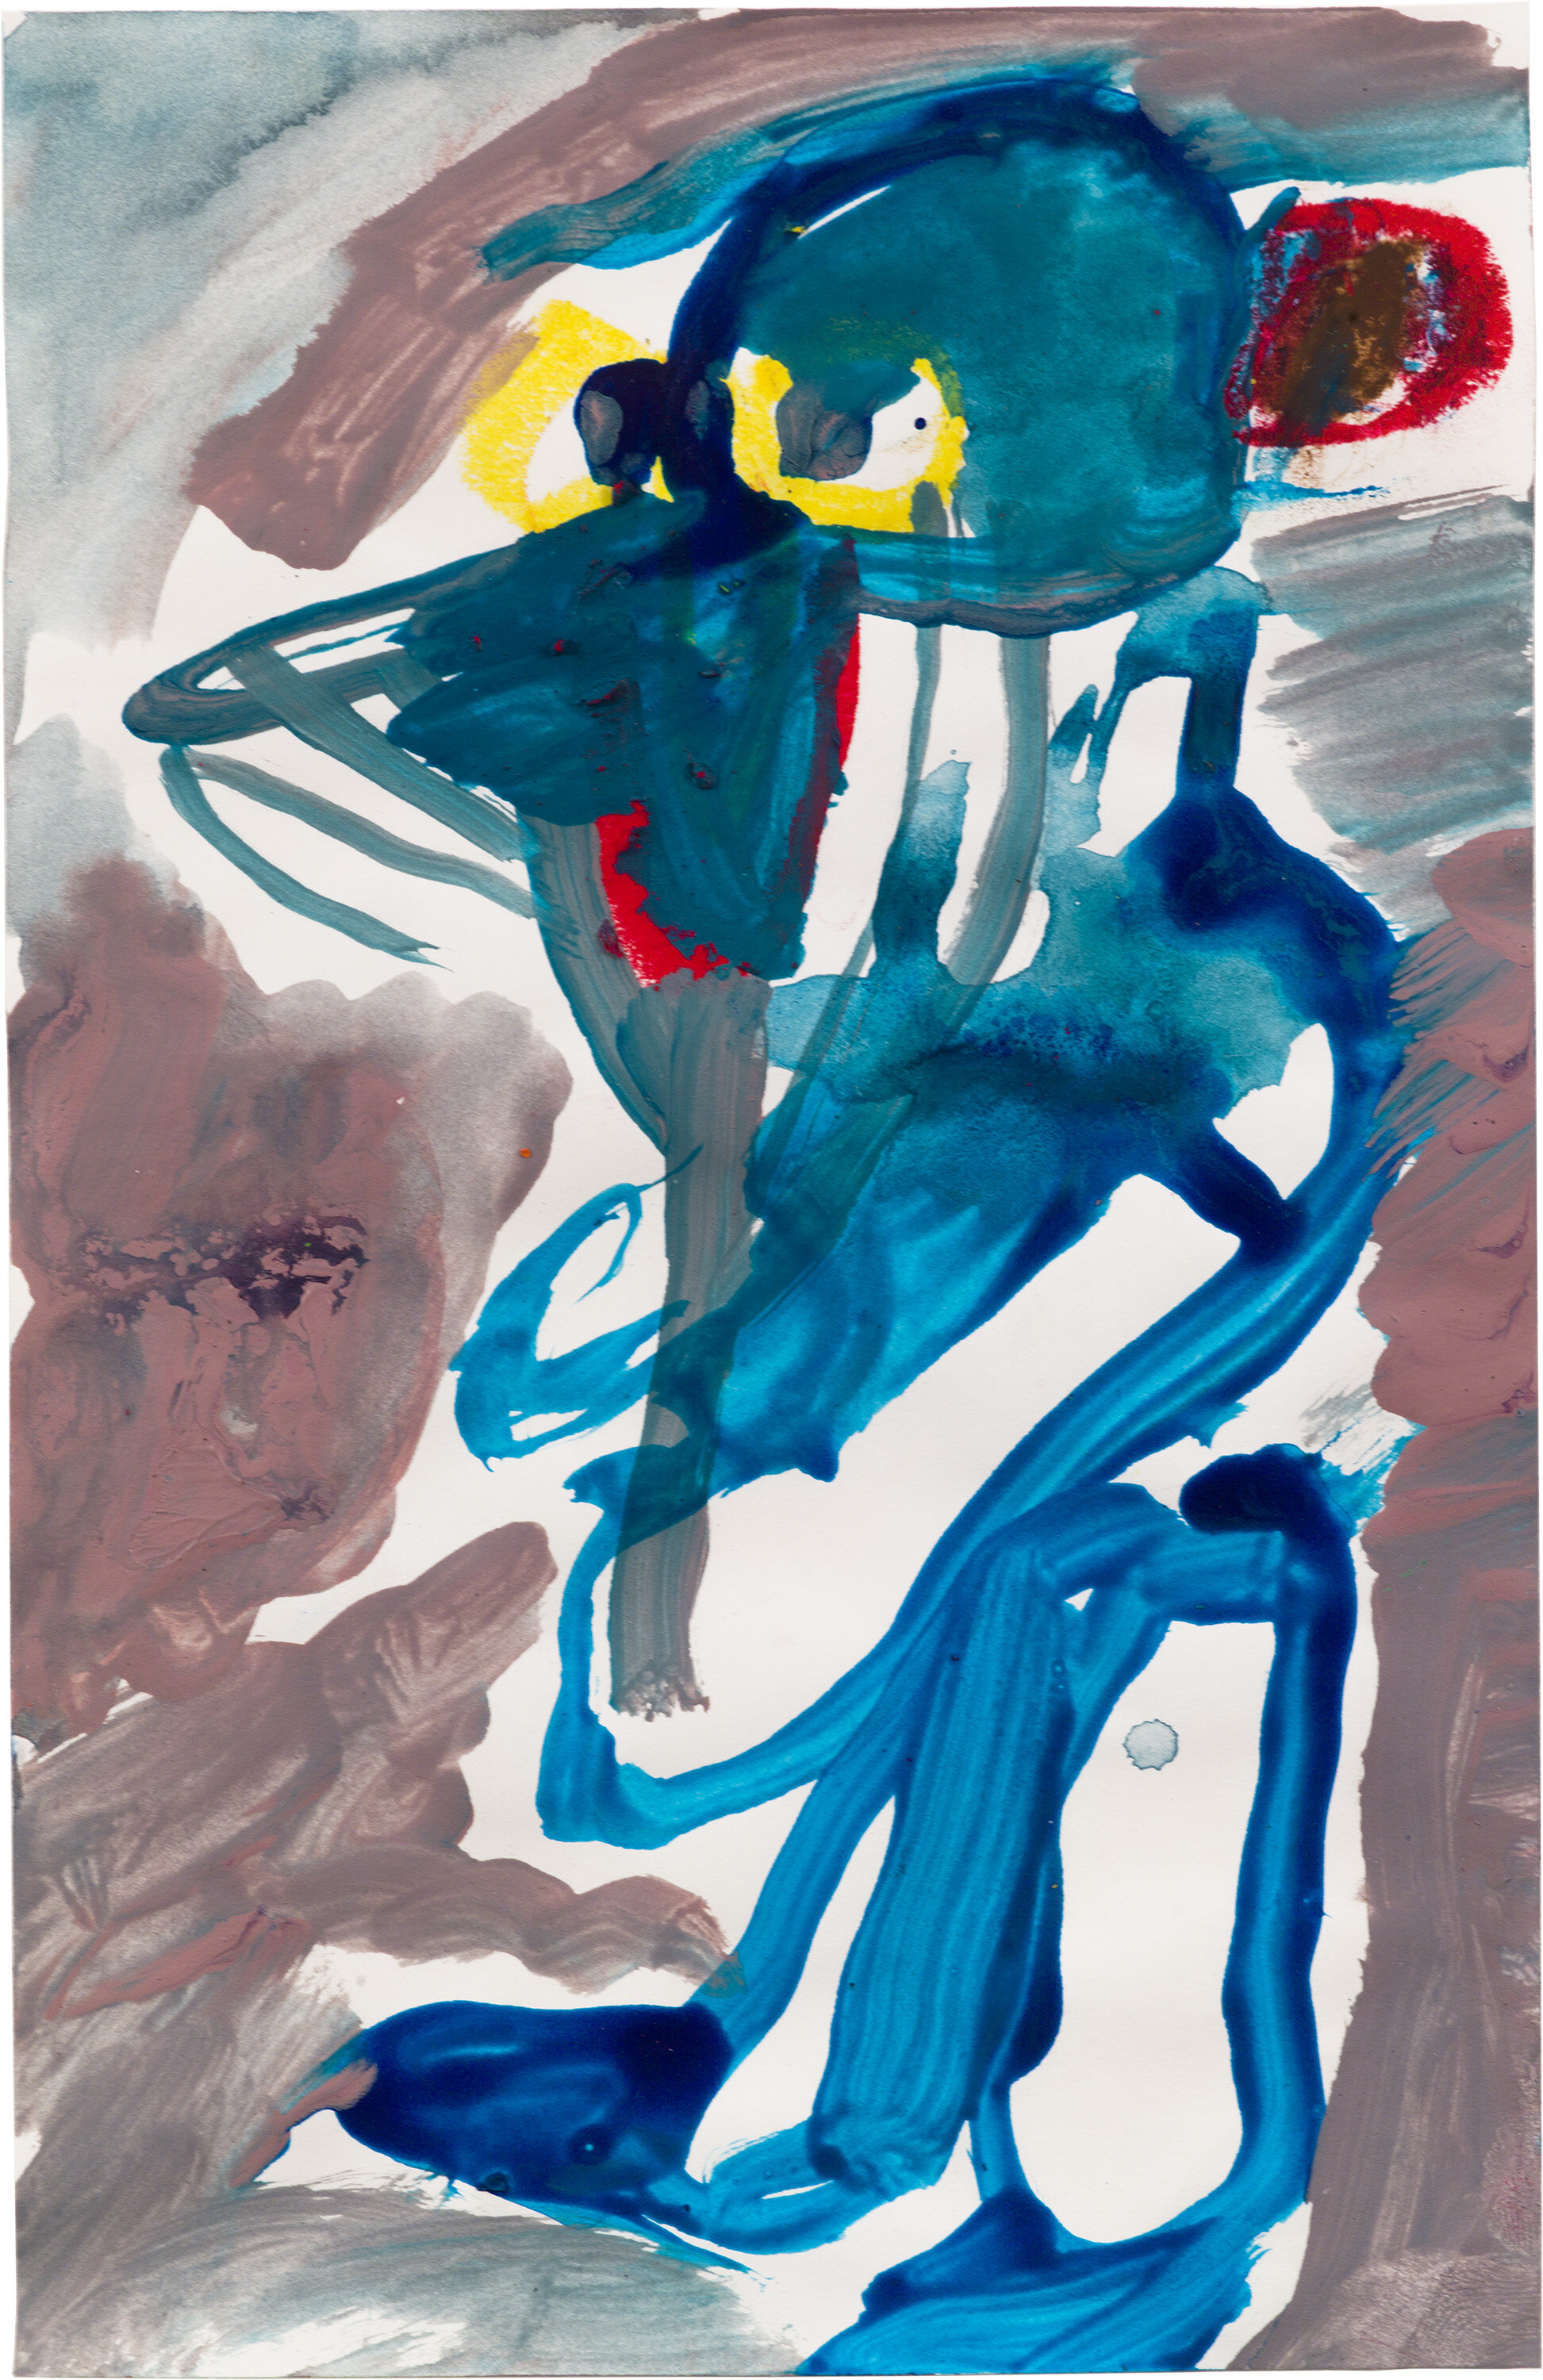  Drew Beattie and Ben Shepard  DBBS-DRW-2013-013   2013 acrylic and oil stick on paper 8.5 x 5.5 inches 